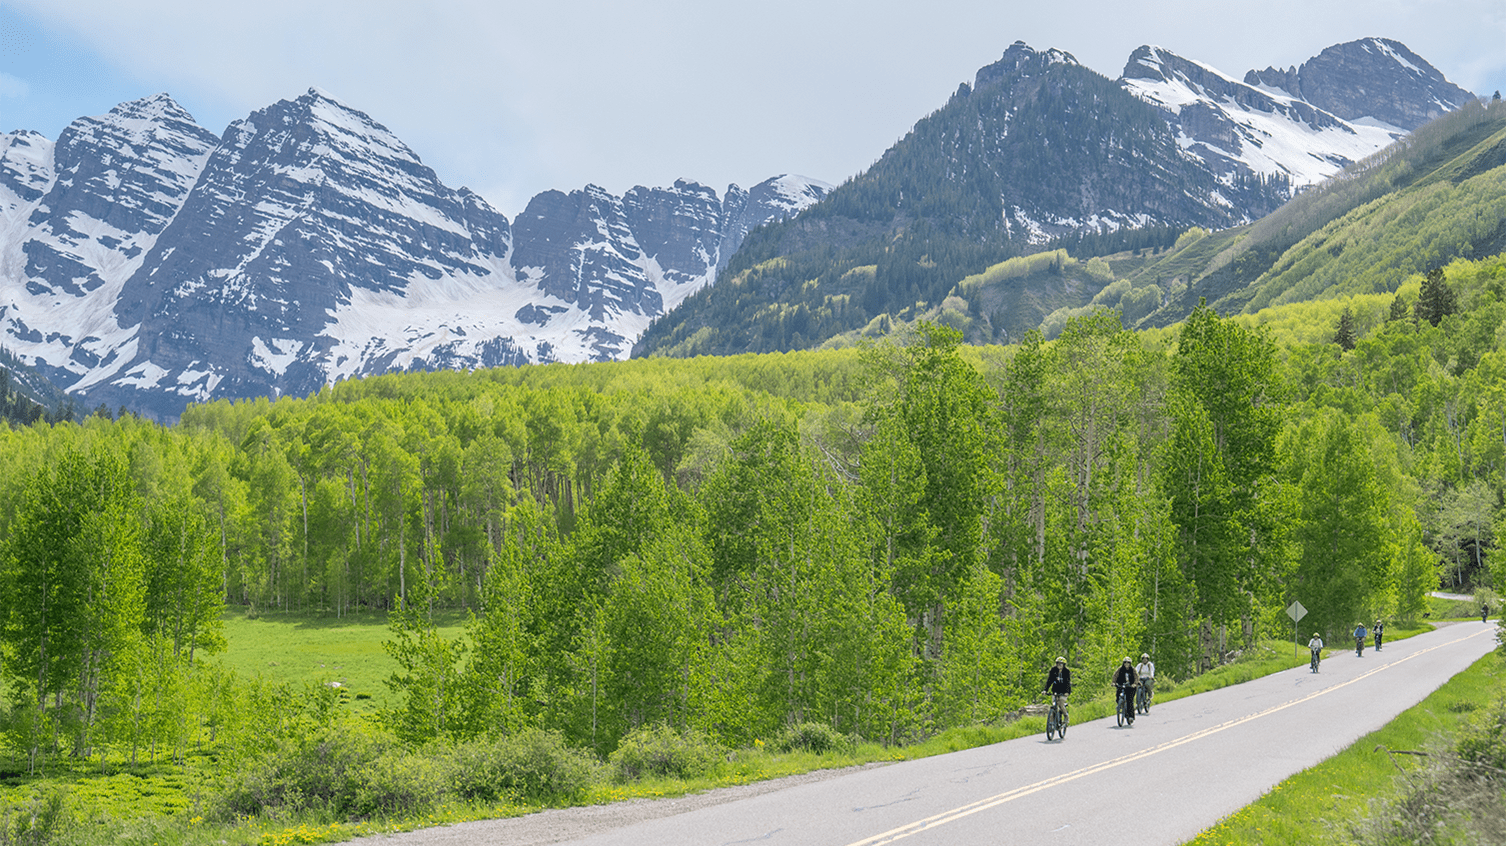 Bikers on the shoulder of the road riding up to Maroon Bells